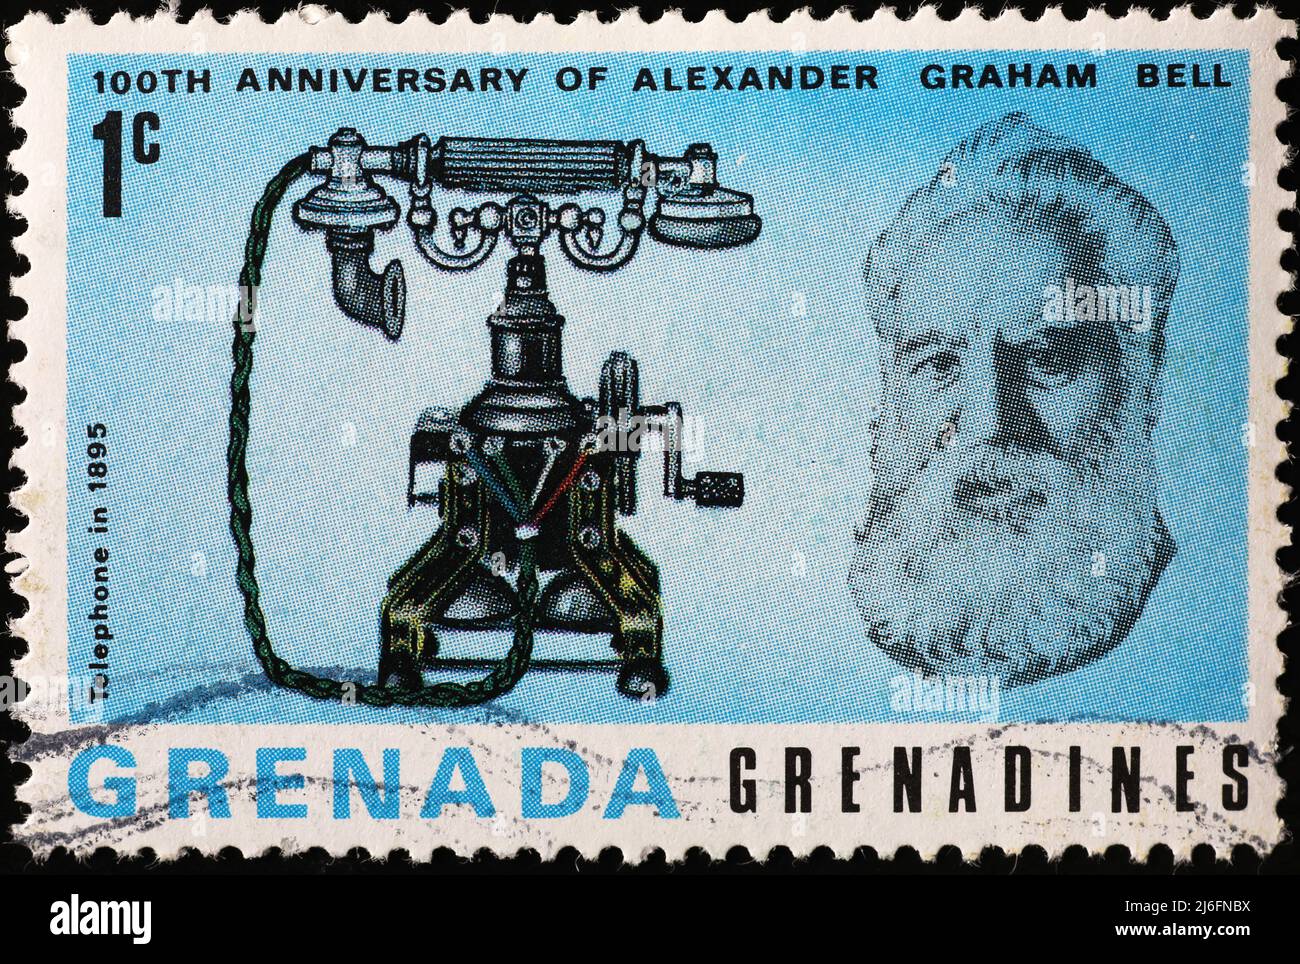 Anniversary of Alexander Graham Bell celebrated on stamp Stock Photo